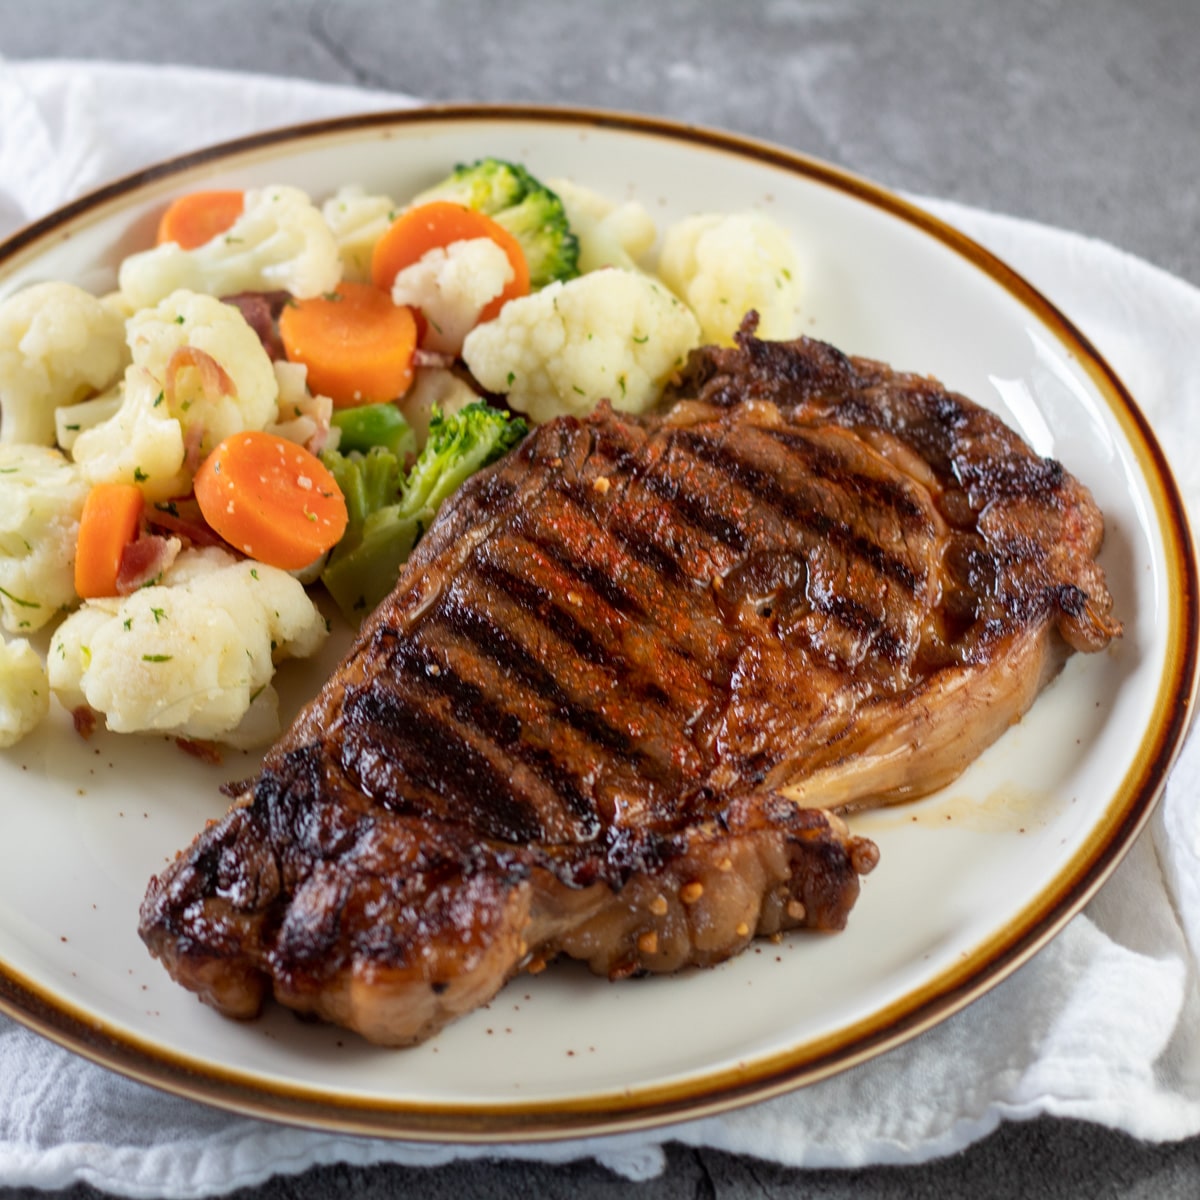 Square image of a grilled ribeye steak on a plate with mixed veggies.